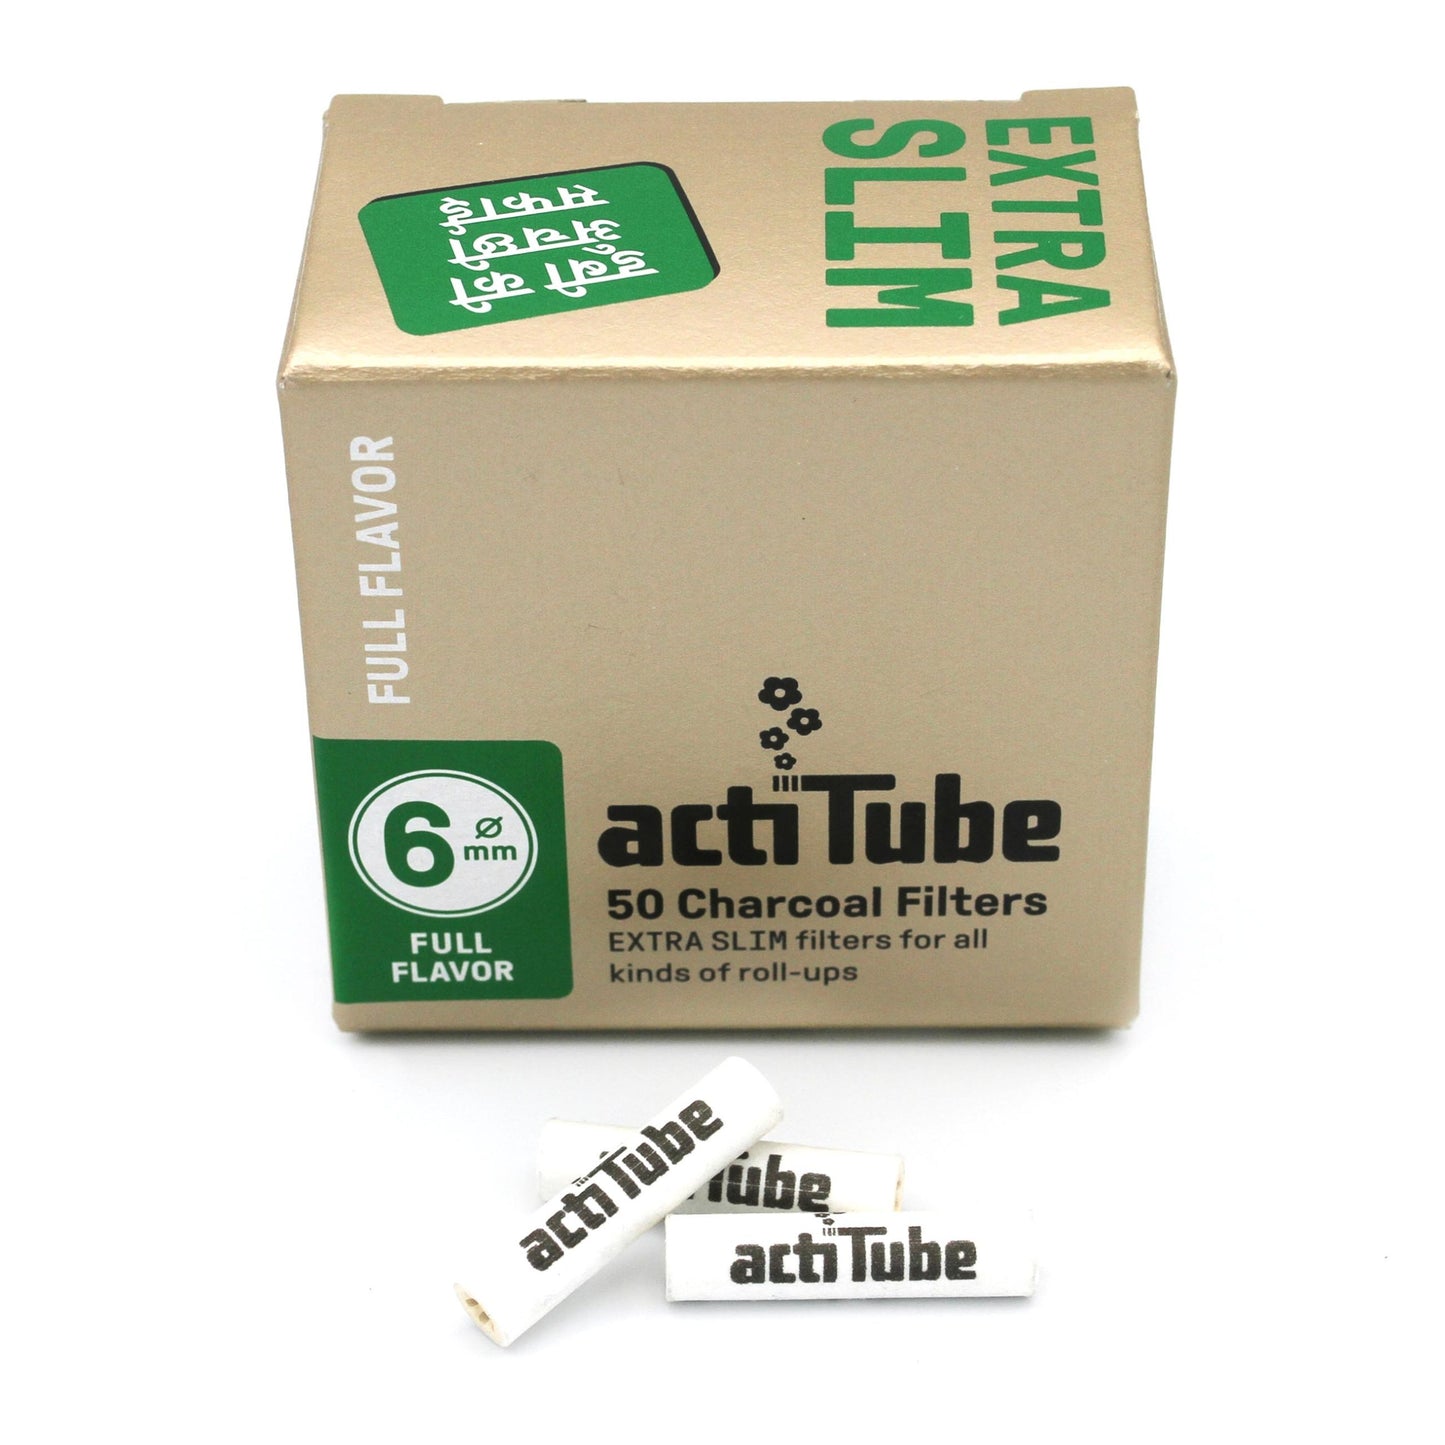 ACTITUBE EXTRA SLIM 6mm ACTIVATED CHARCOAL FILTERS